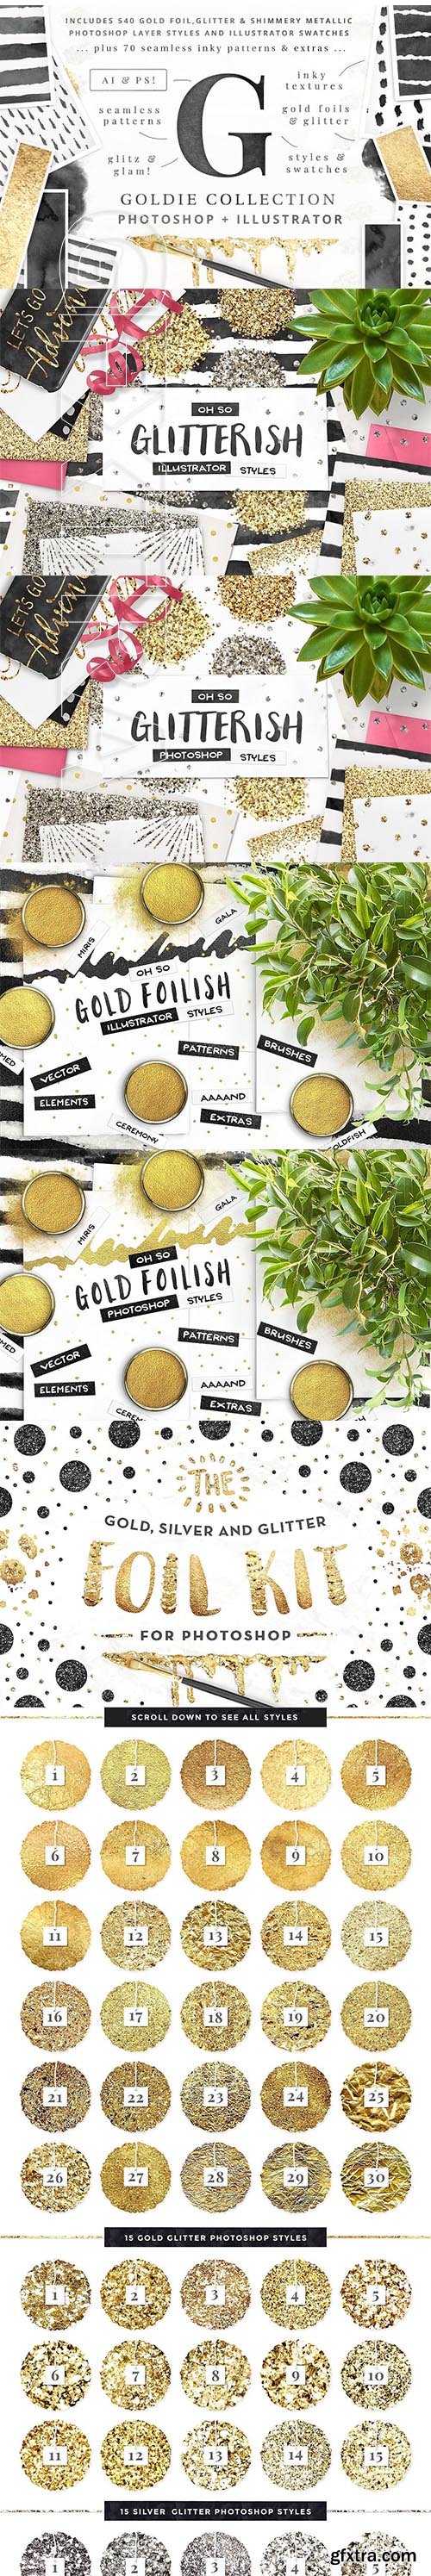 CreativeMarket - 540 Gold & Shimmer Styles & Swatches 2927032